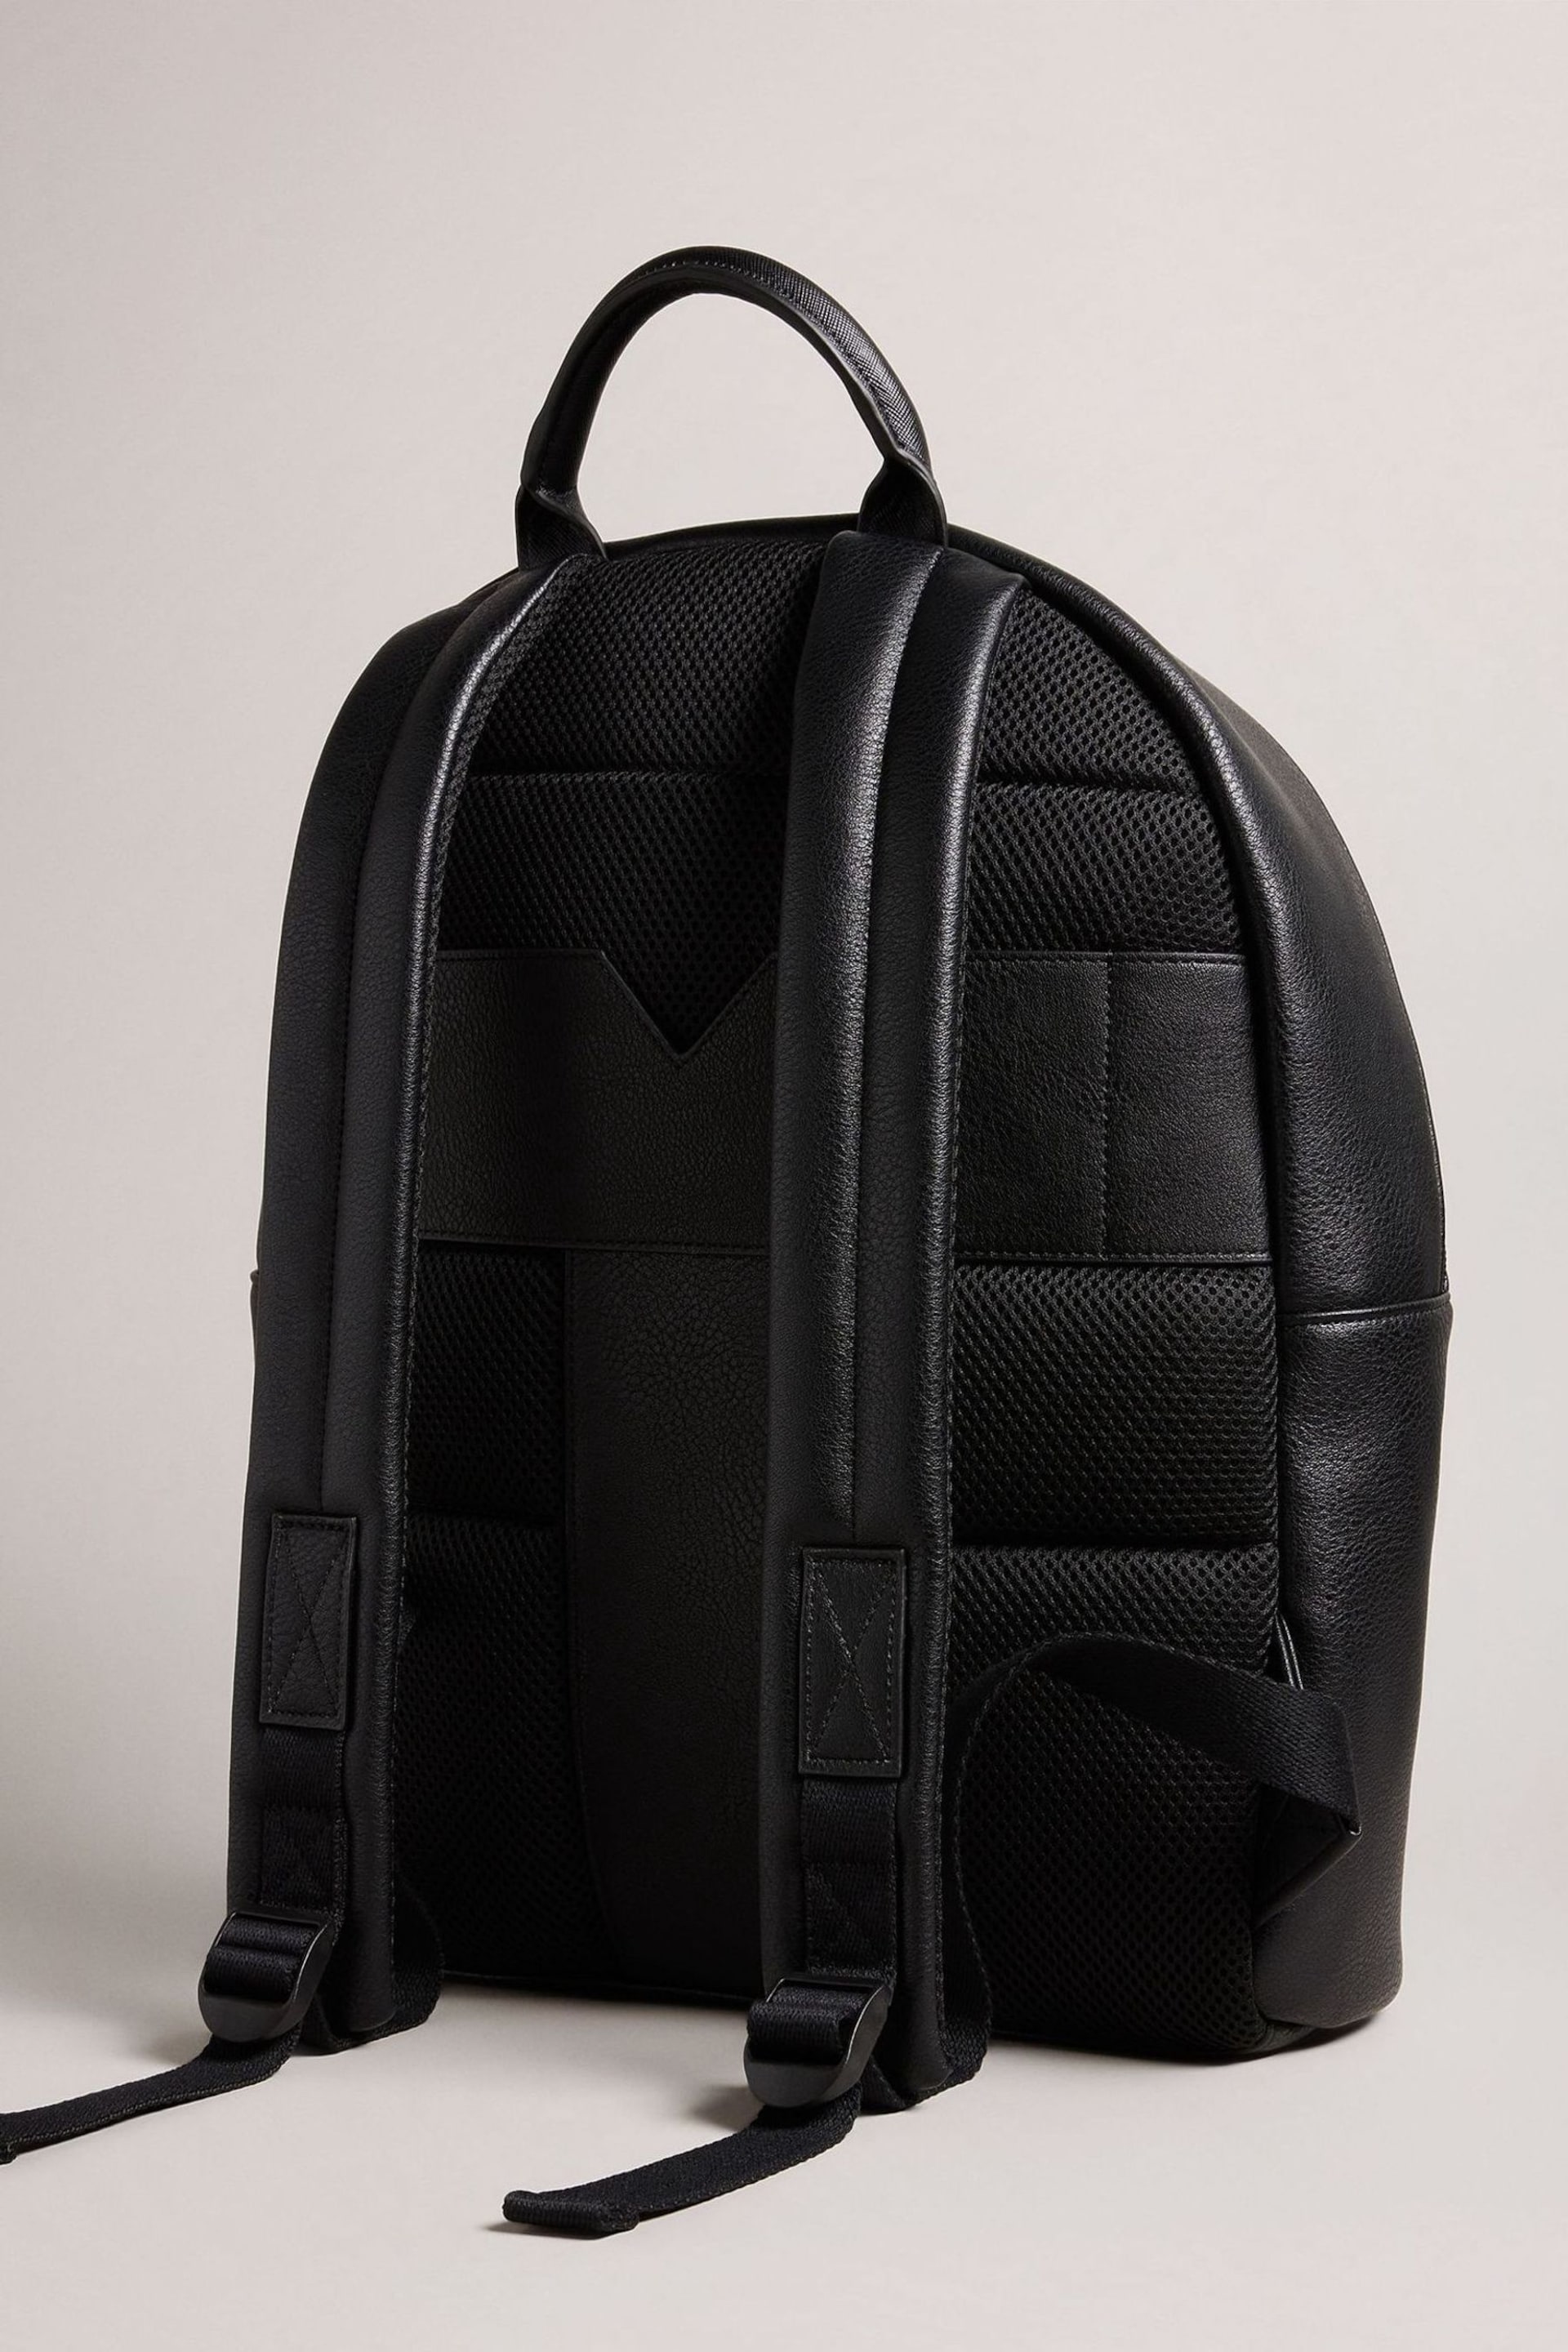 Ted Baker Black Waynor House Check PU Backpack - Image 2 of 5